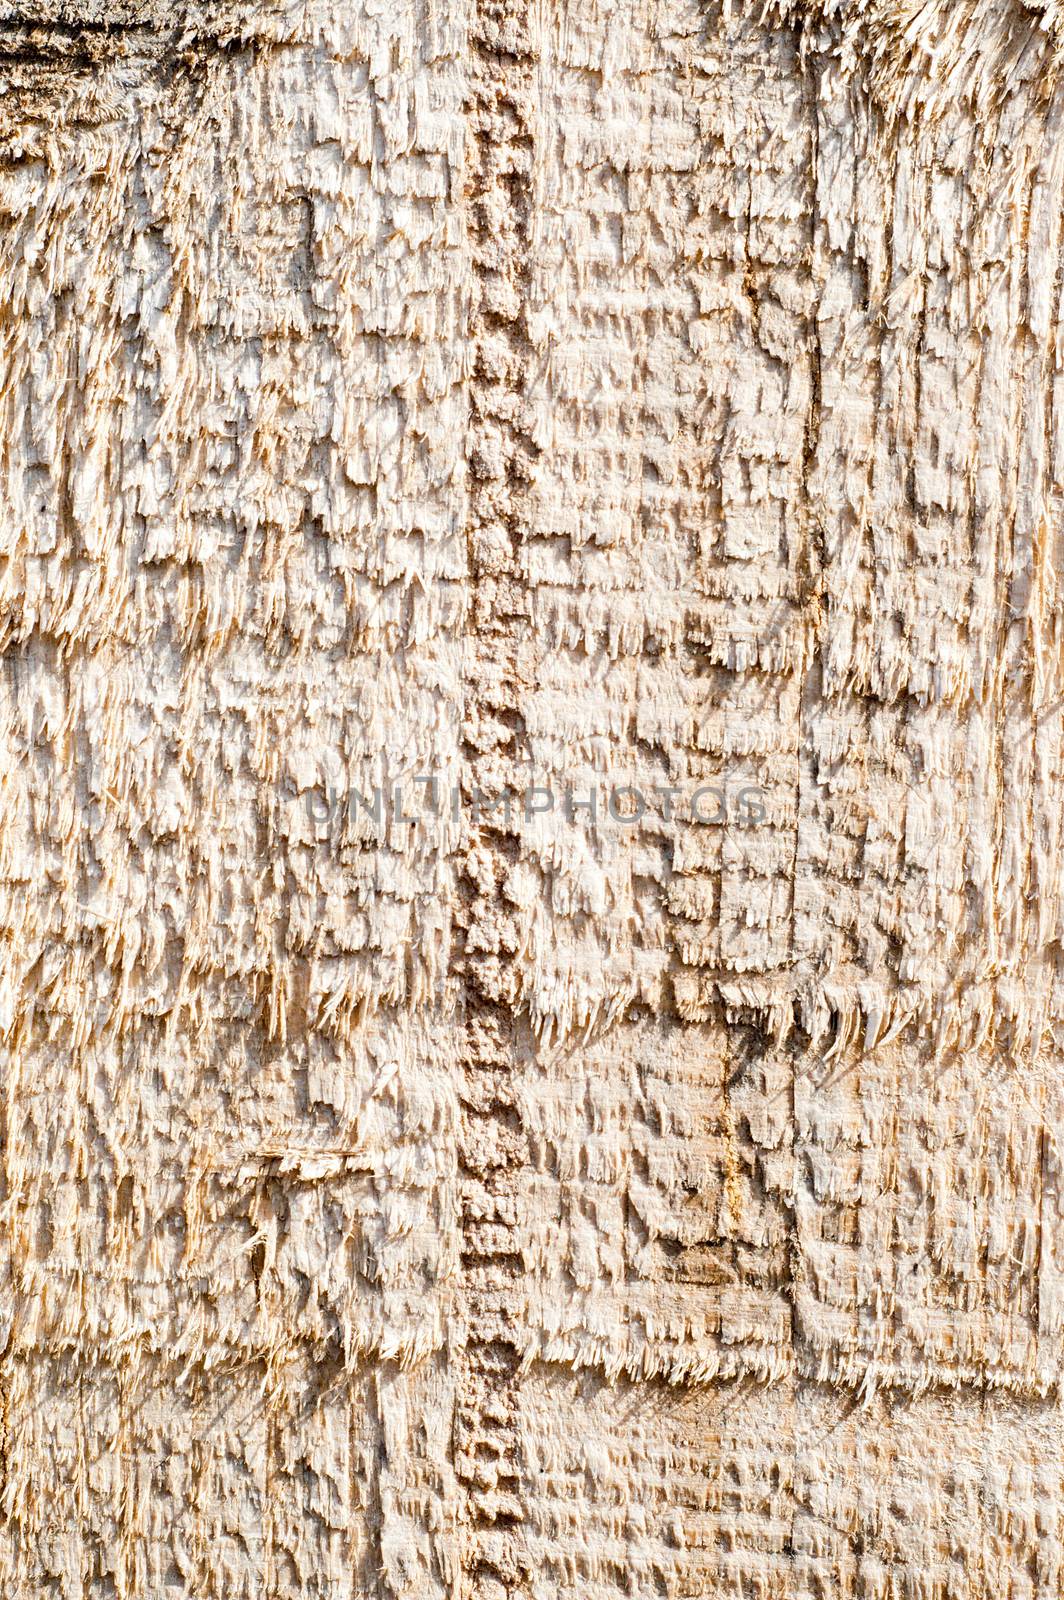 textured surface of board with a rough surface by mycola